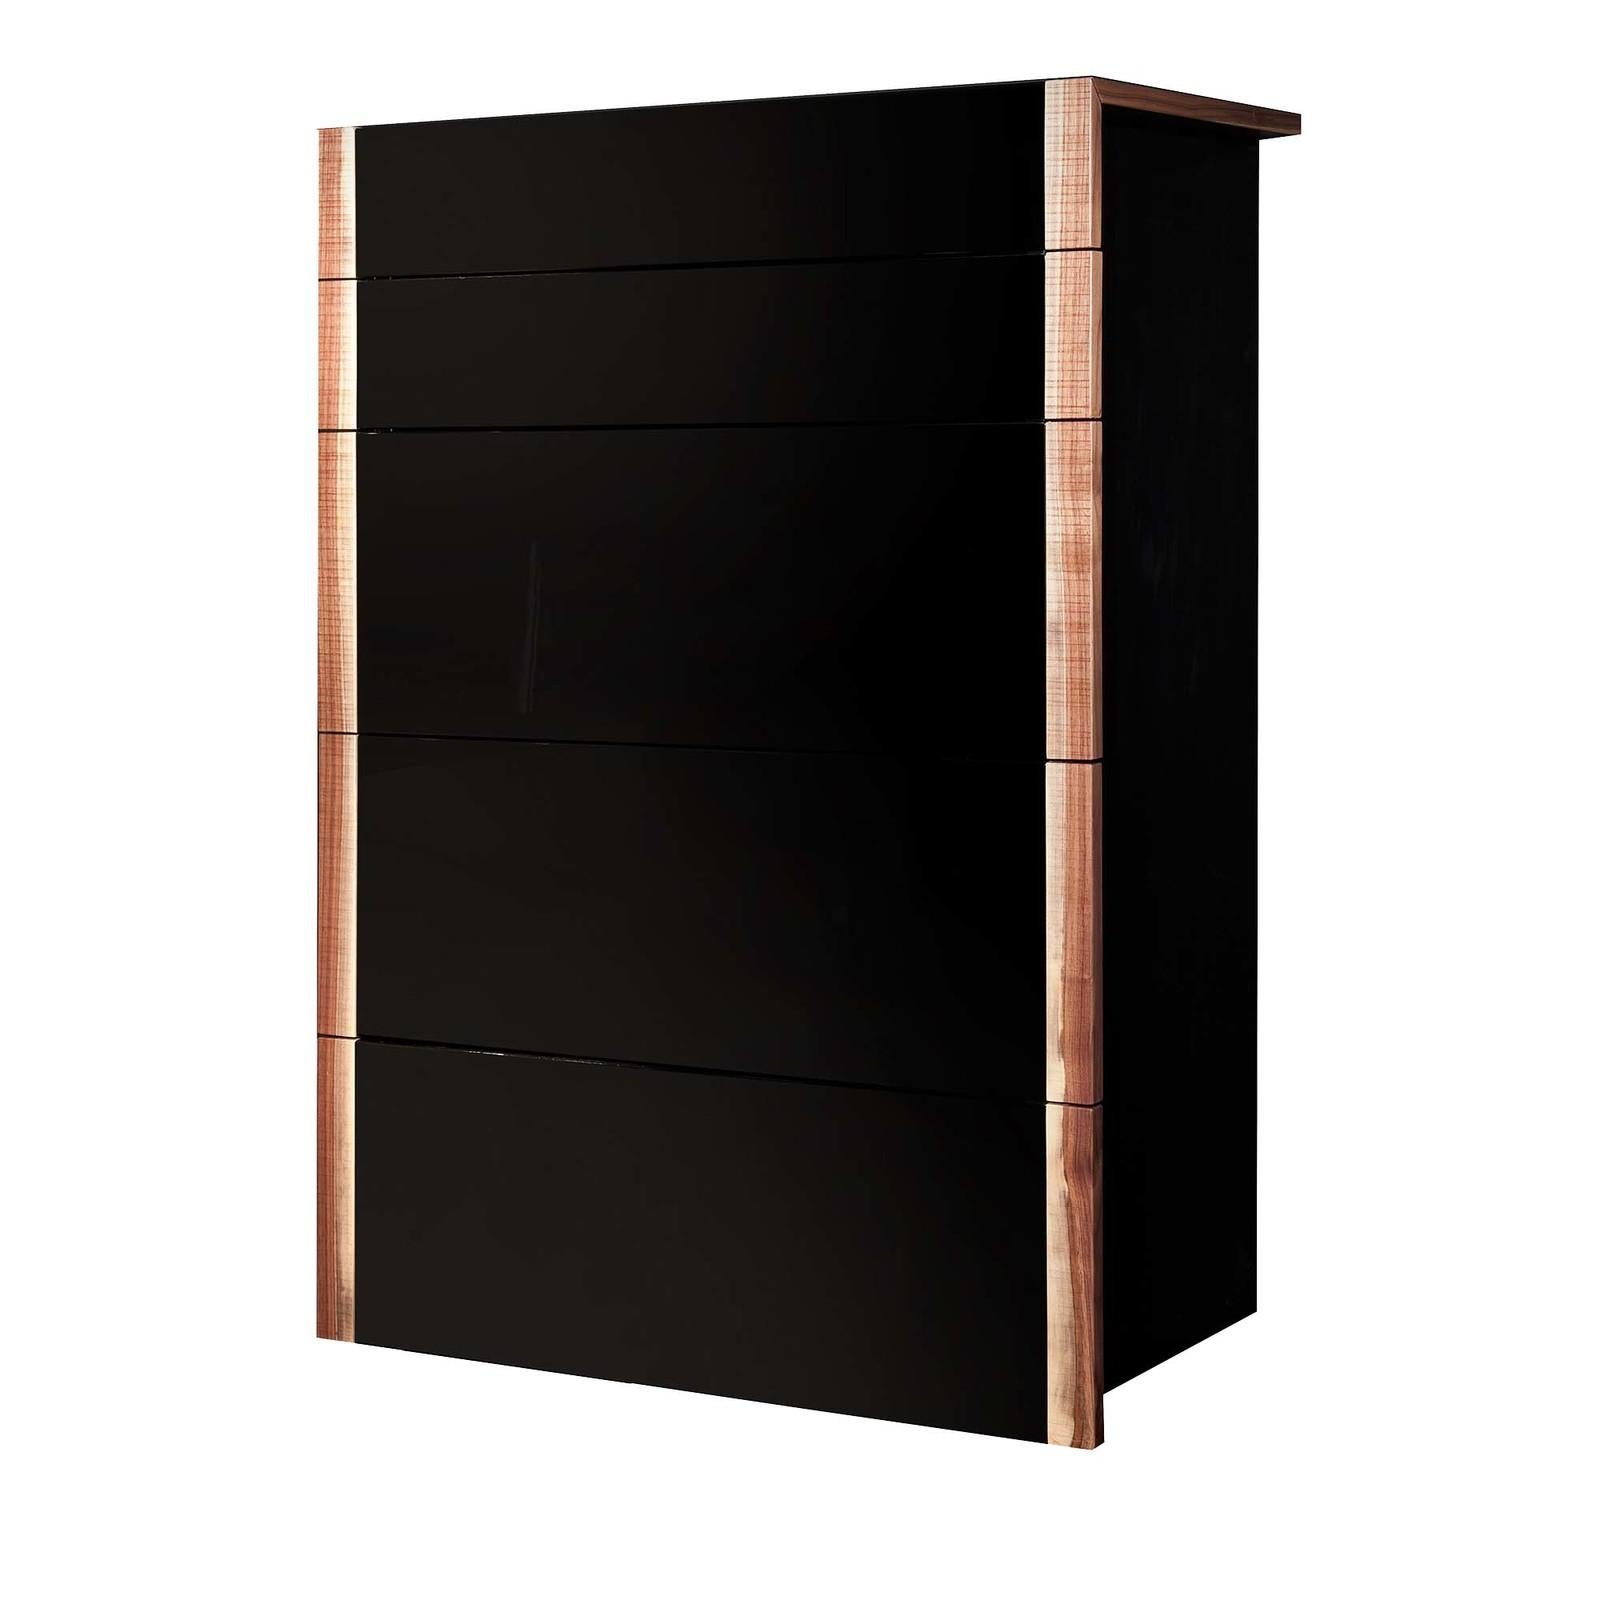 The essential lines and sleek silhouette of this elegant chest of drawers blend the warm brown hues of the Canaletto walnut frame with the cold, black glossy polyurethane lacquer of the structure. Featuring five drawers (three large and two small on